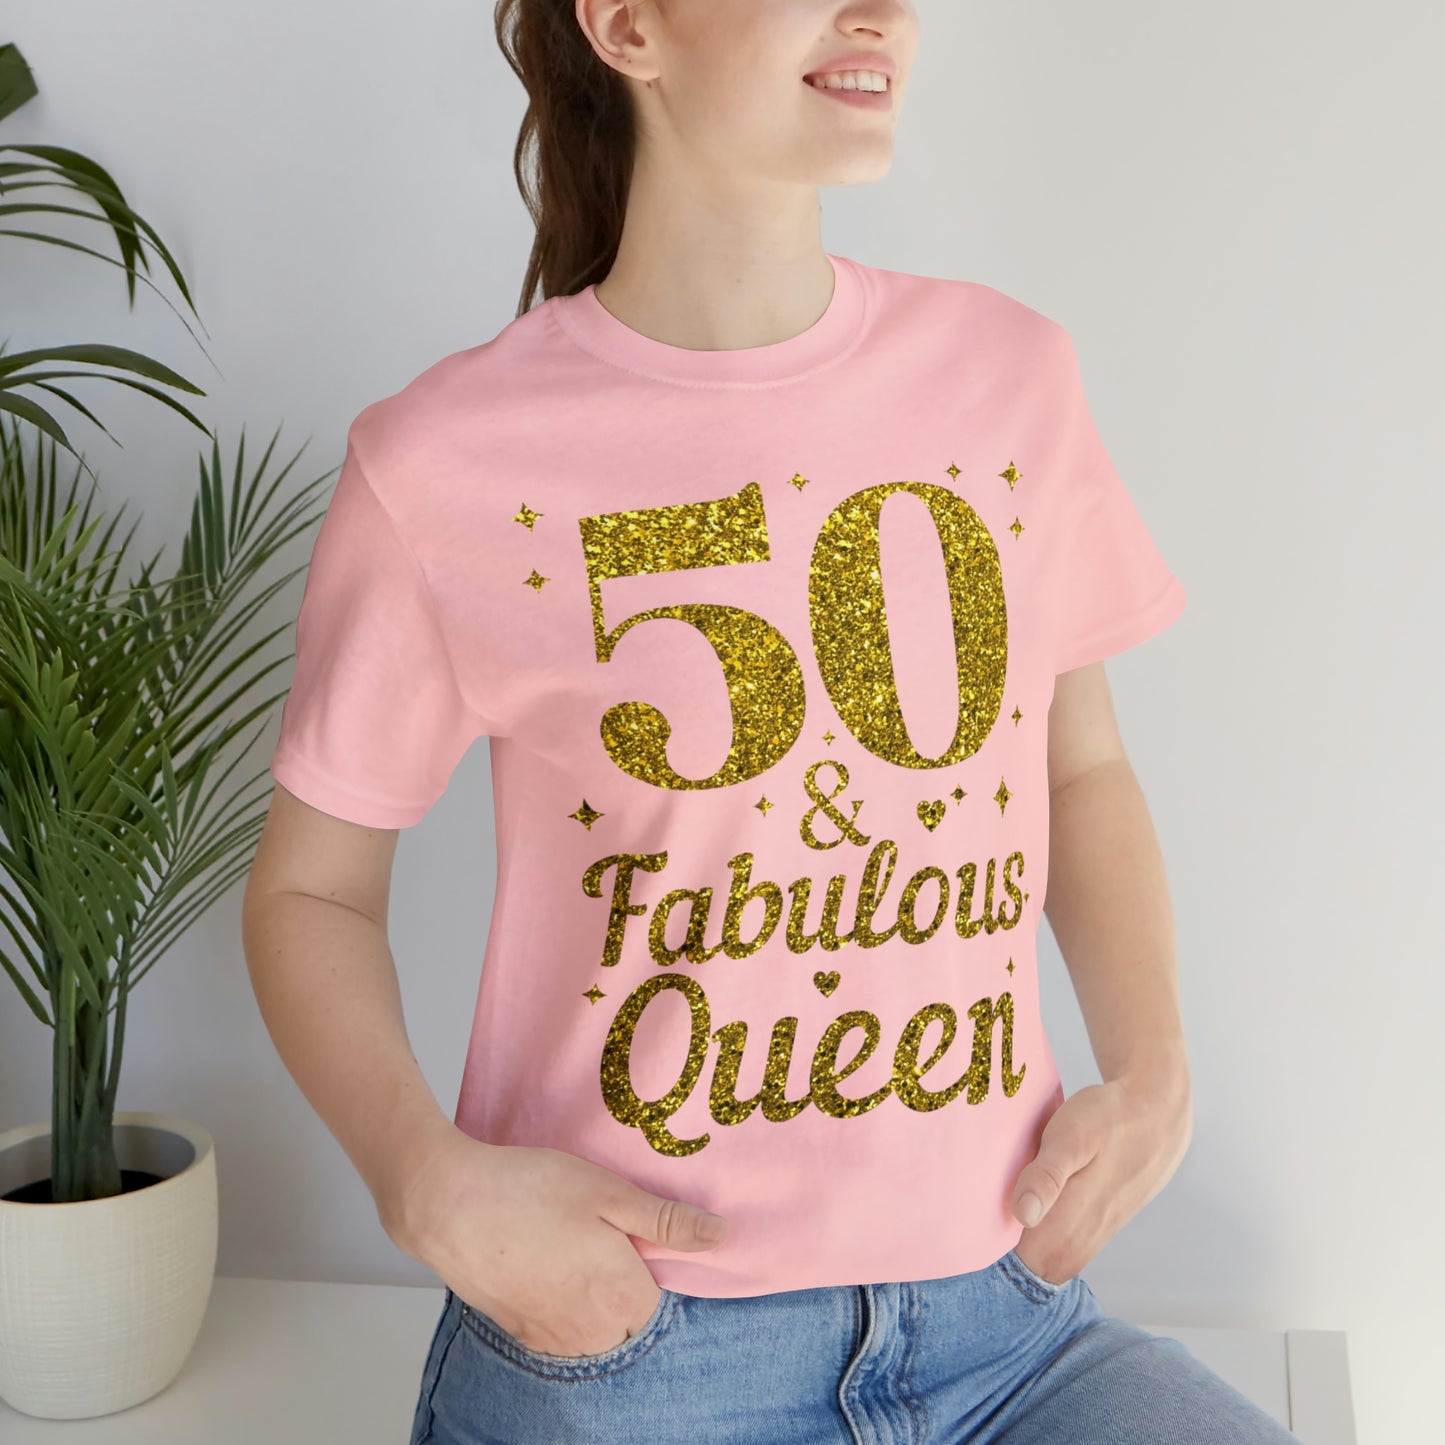 Funny 50th birthday Shirt 50 and Fabulous Queen shirt